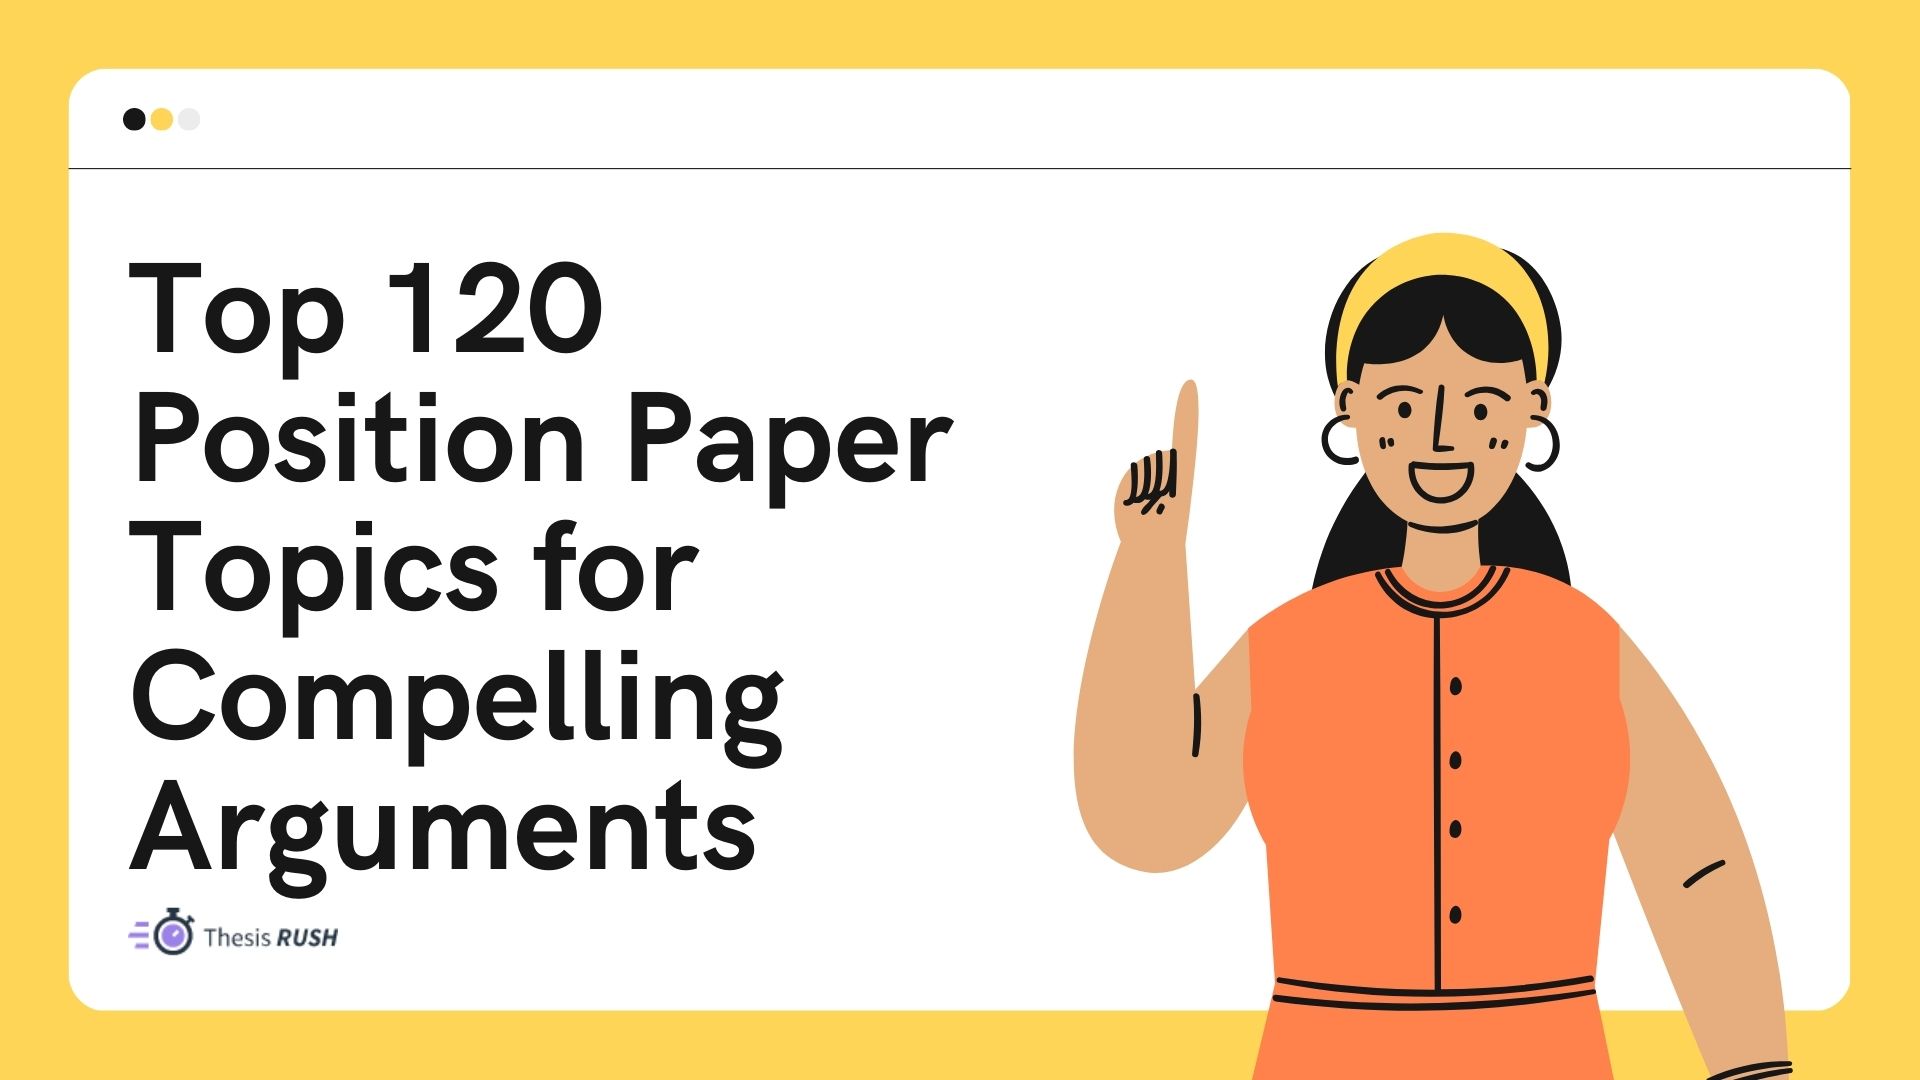 Best 120 Position Paper Topics for Compelling Arguments